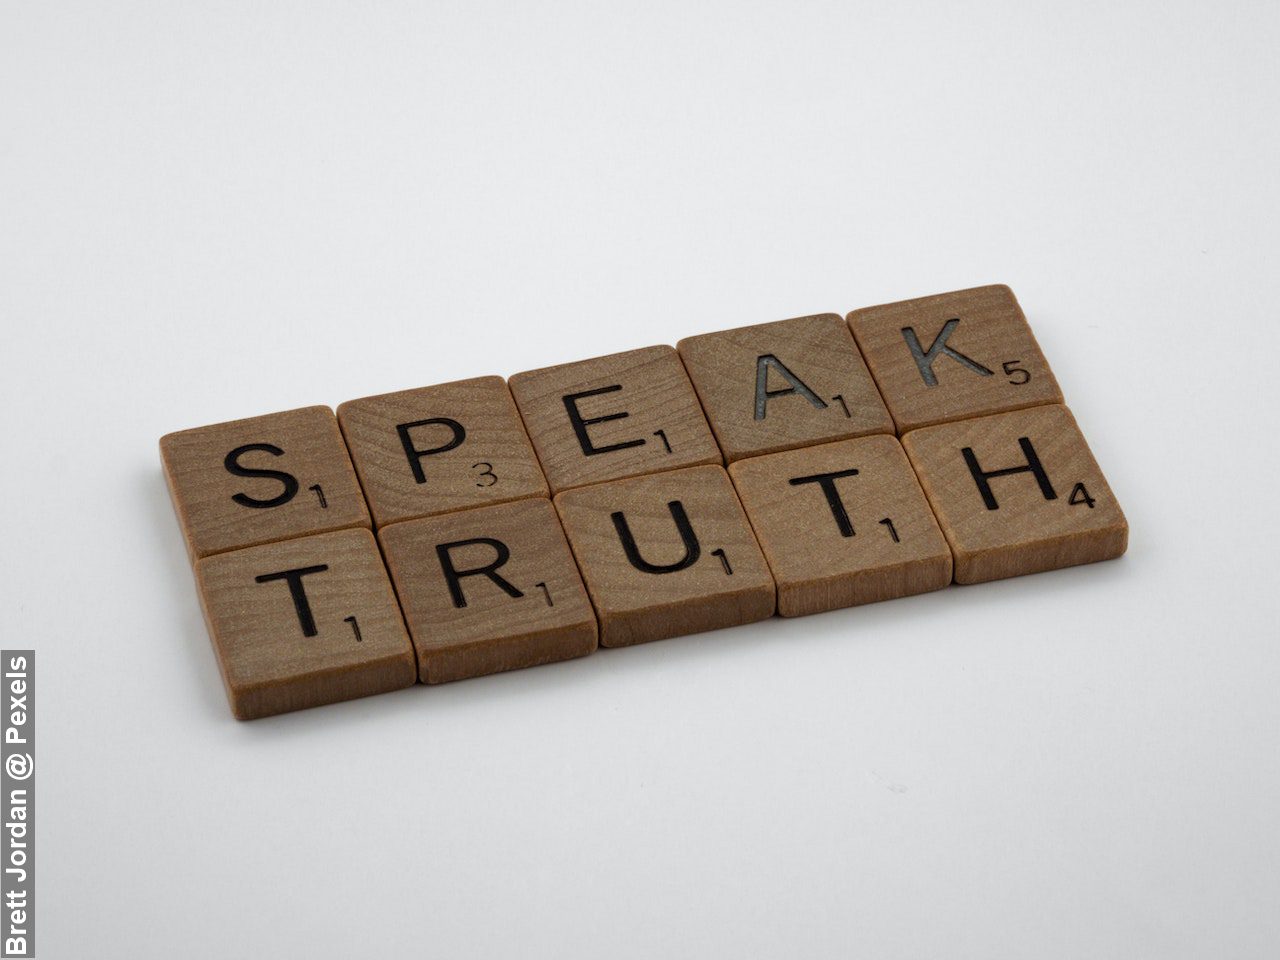 Keeping it Real by speaking the truth. Speaking Truth written on brown wooden blocks on white surface